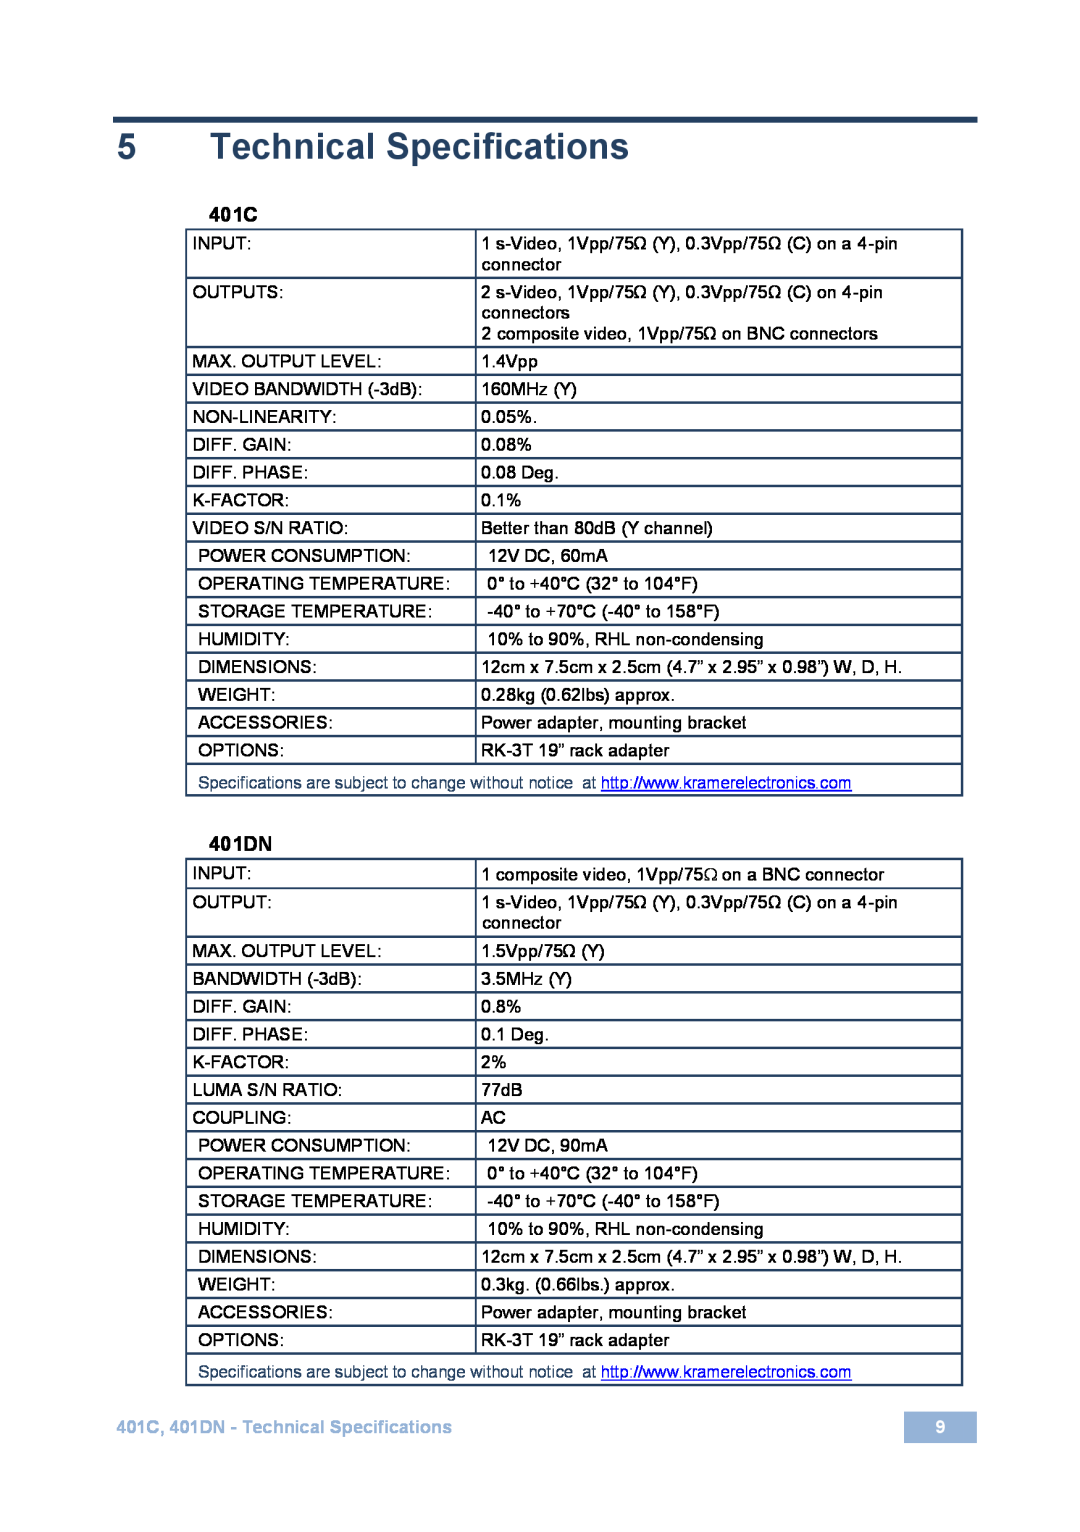 Kramer Electronics user manual 401C, 401DN - Technical Specifications 